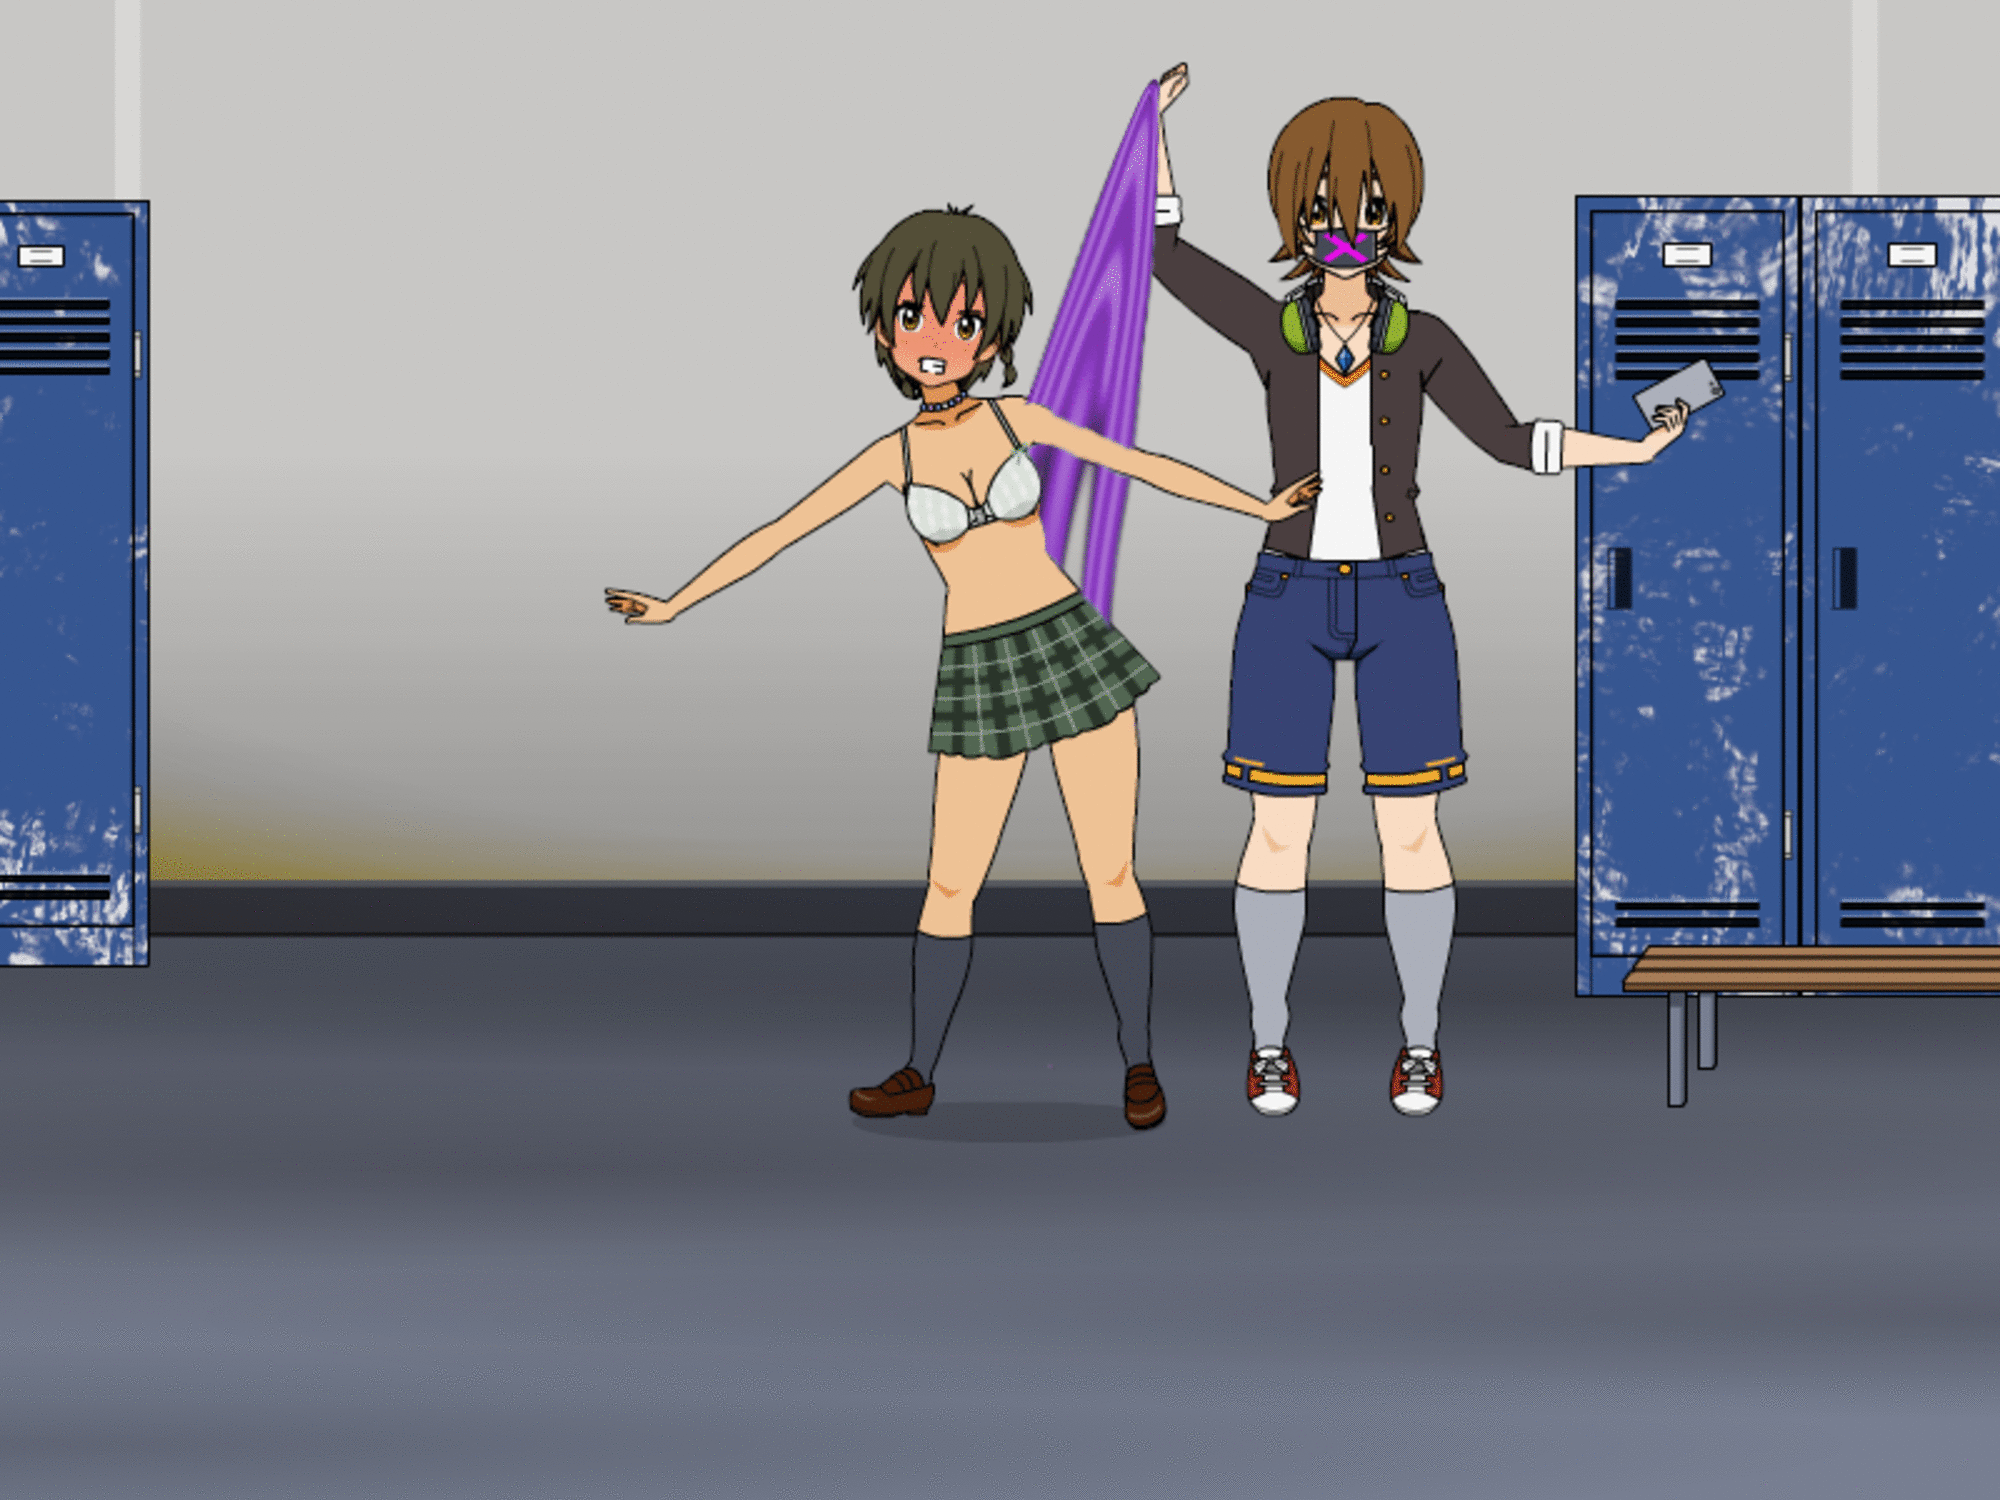 Anime Wedgie Fight GIFs